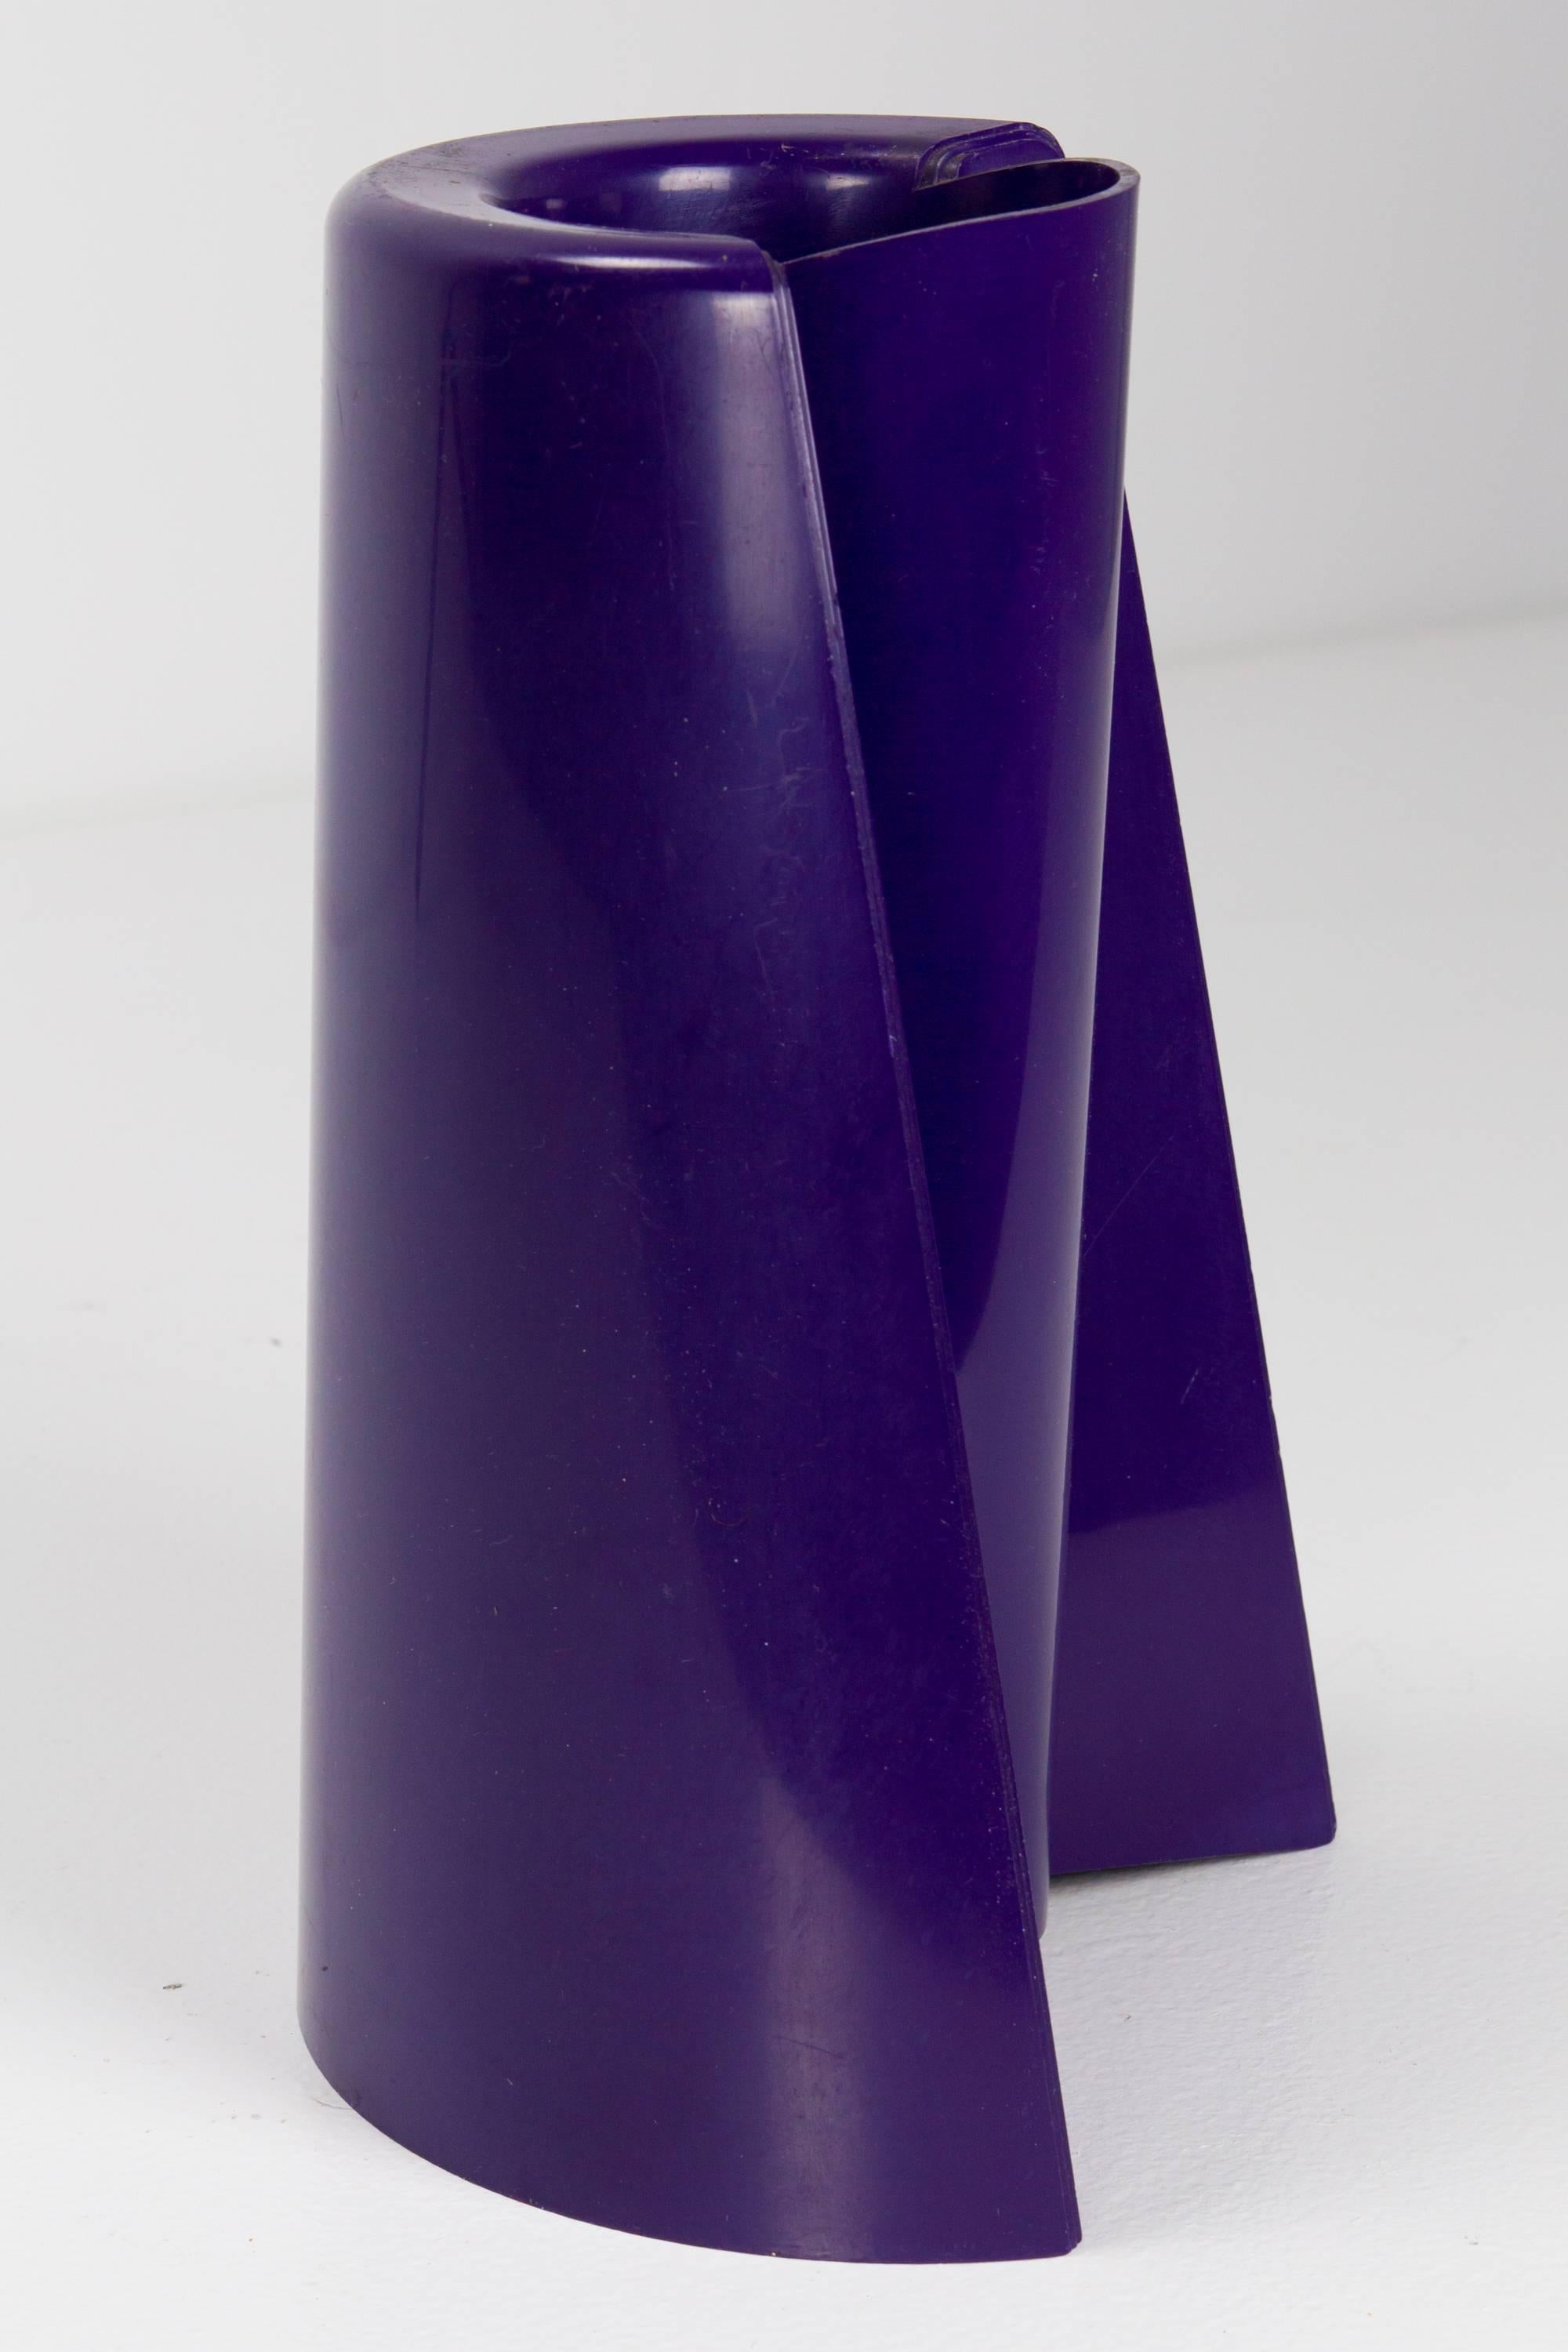 Mid-Century Modern Enzo Mari Pago Pago Vase for Danese For Sale